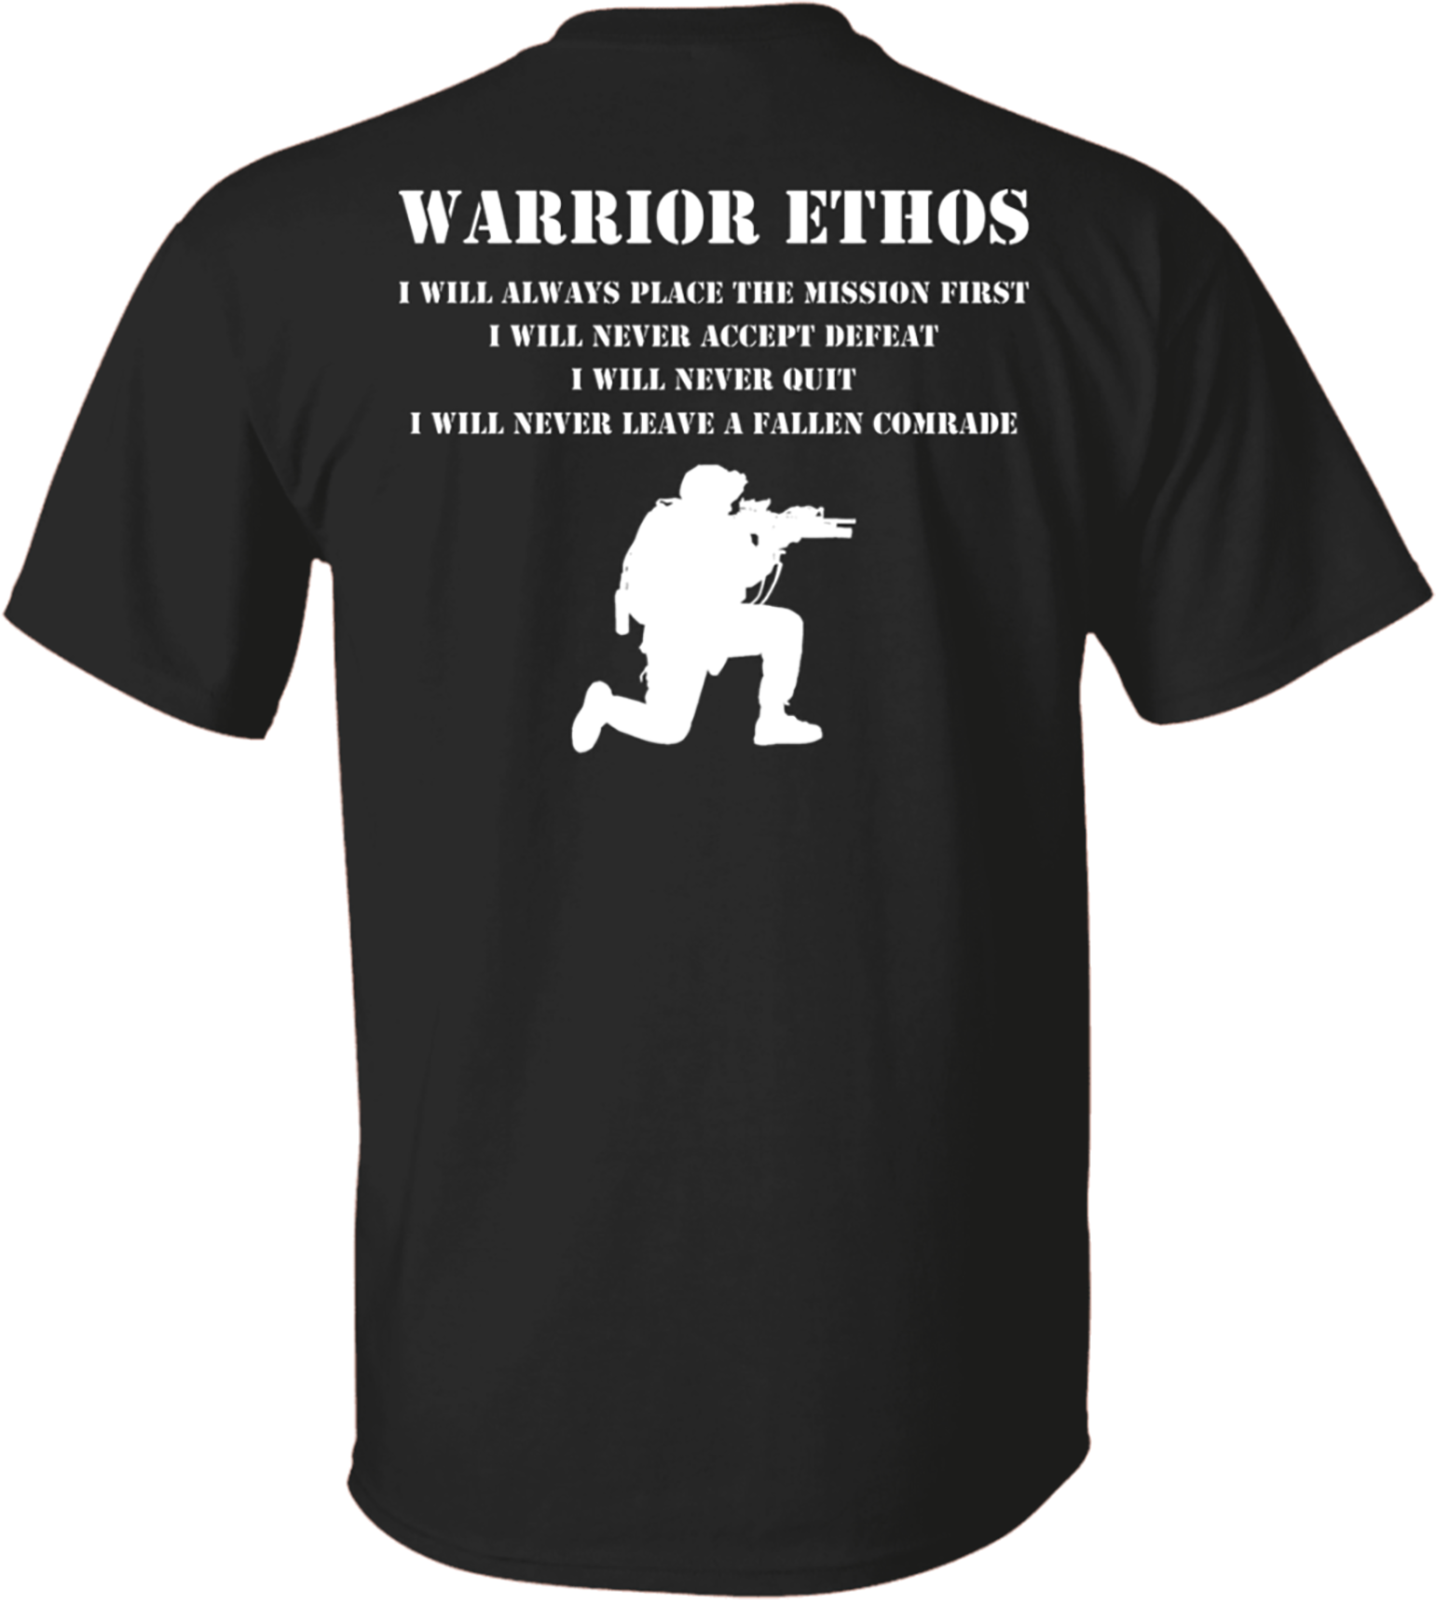 Warrior ethos I will always place the mission first I will never accept defeat - Veteran sniper